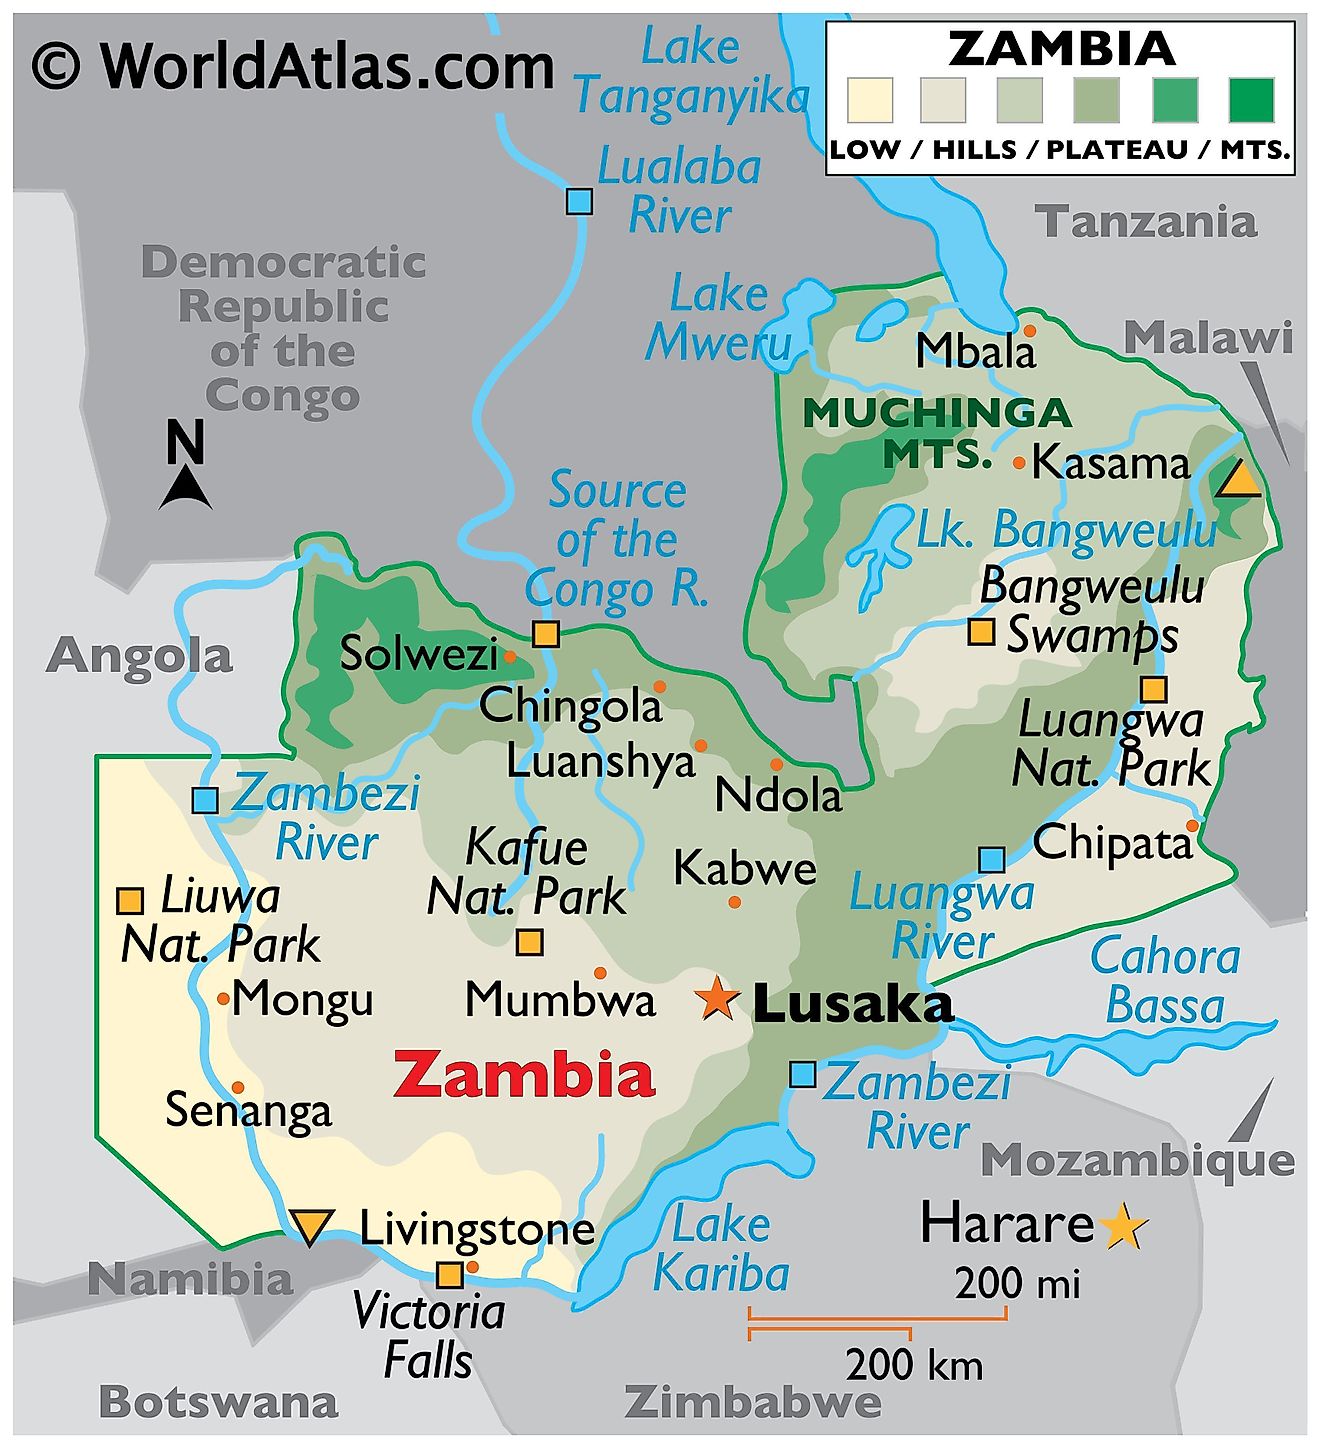 Physical Map of Zambia. It shows the physical features of Zambia including the major mountain ranges, rivers, lakes, and other natural features.